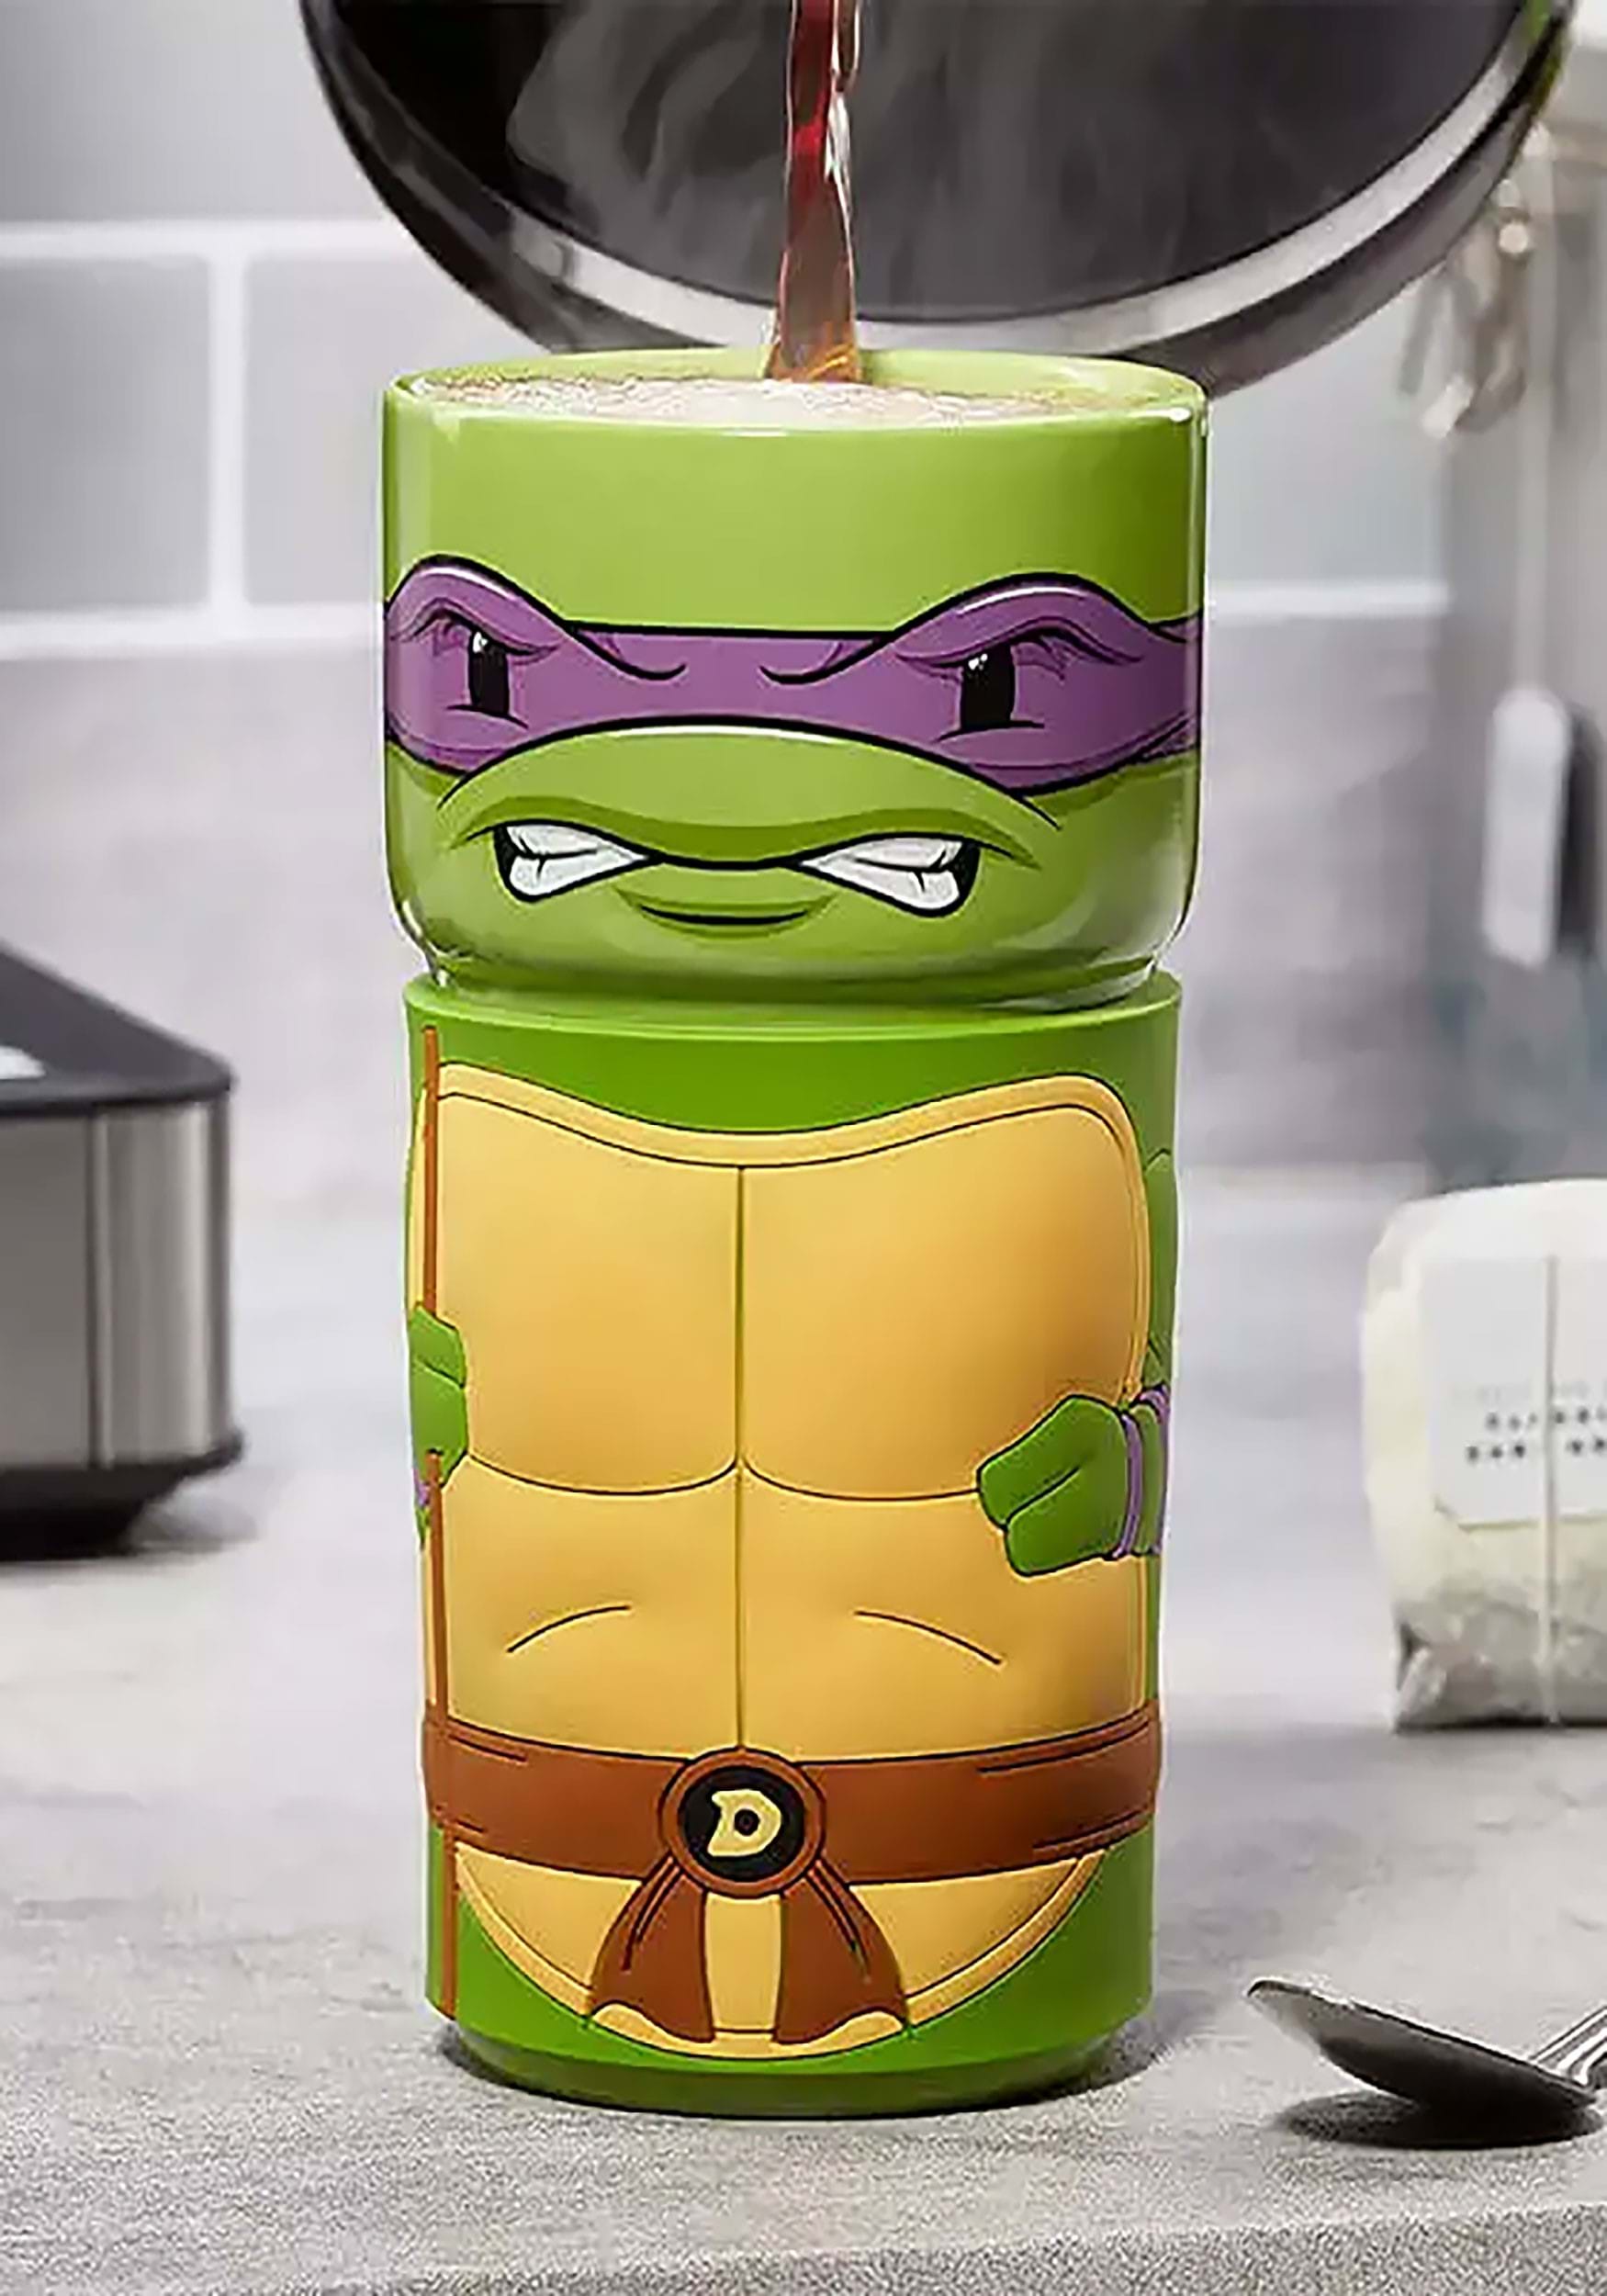 https://images.fun.com/products/91358/1-1/tmnt-donatello-coscup.jpg